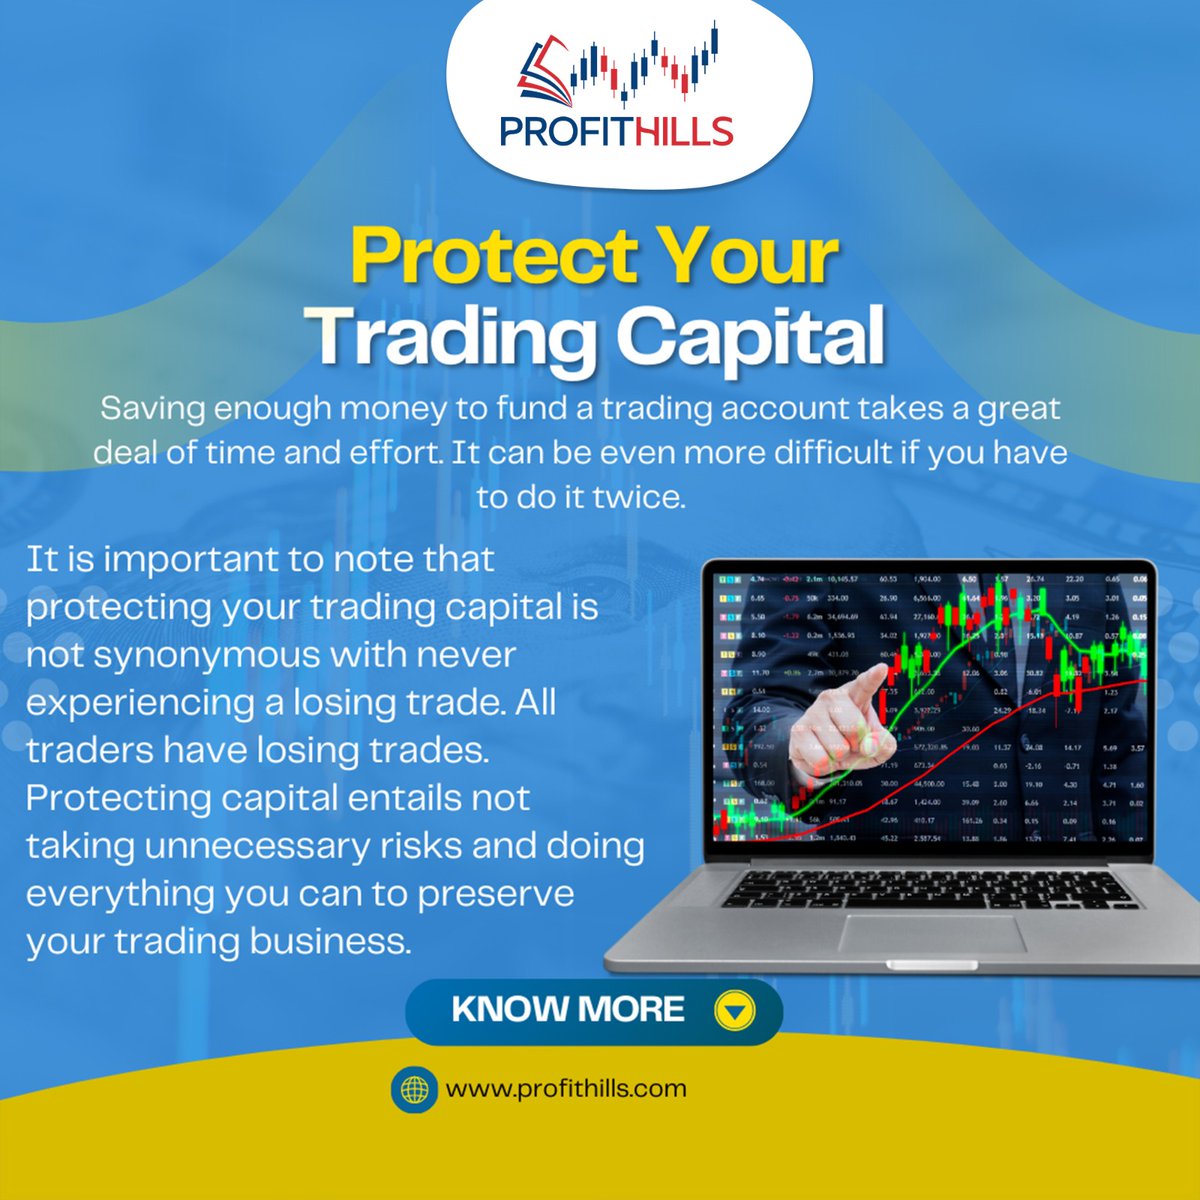 Protect your trading capital like a pro! 💼 Learn essential strategies to safeguard your investments in the volatile world of Forex Trading with Code Highlights
.
.
#stocks #Trading #ForexTrading #CandlestickPatterns #Forextrading #ForexTradingTips #FinancialSuccess #Profithills